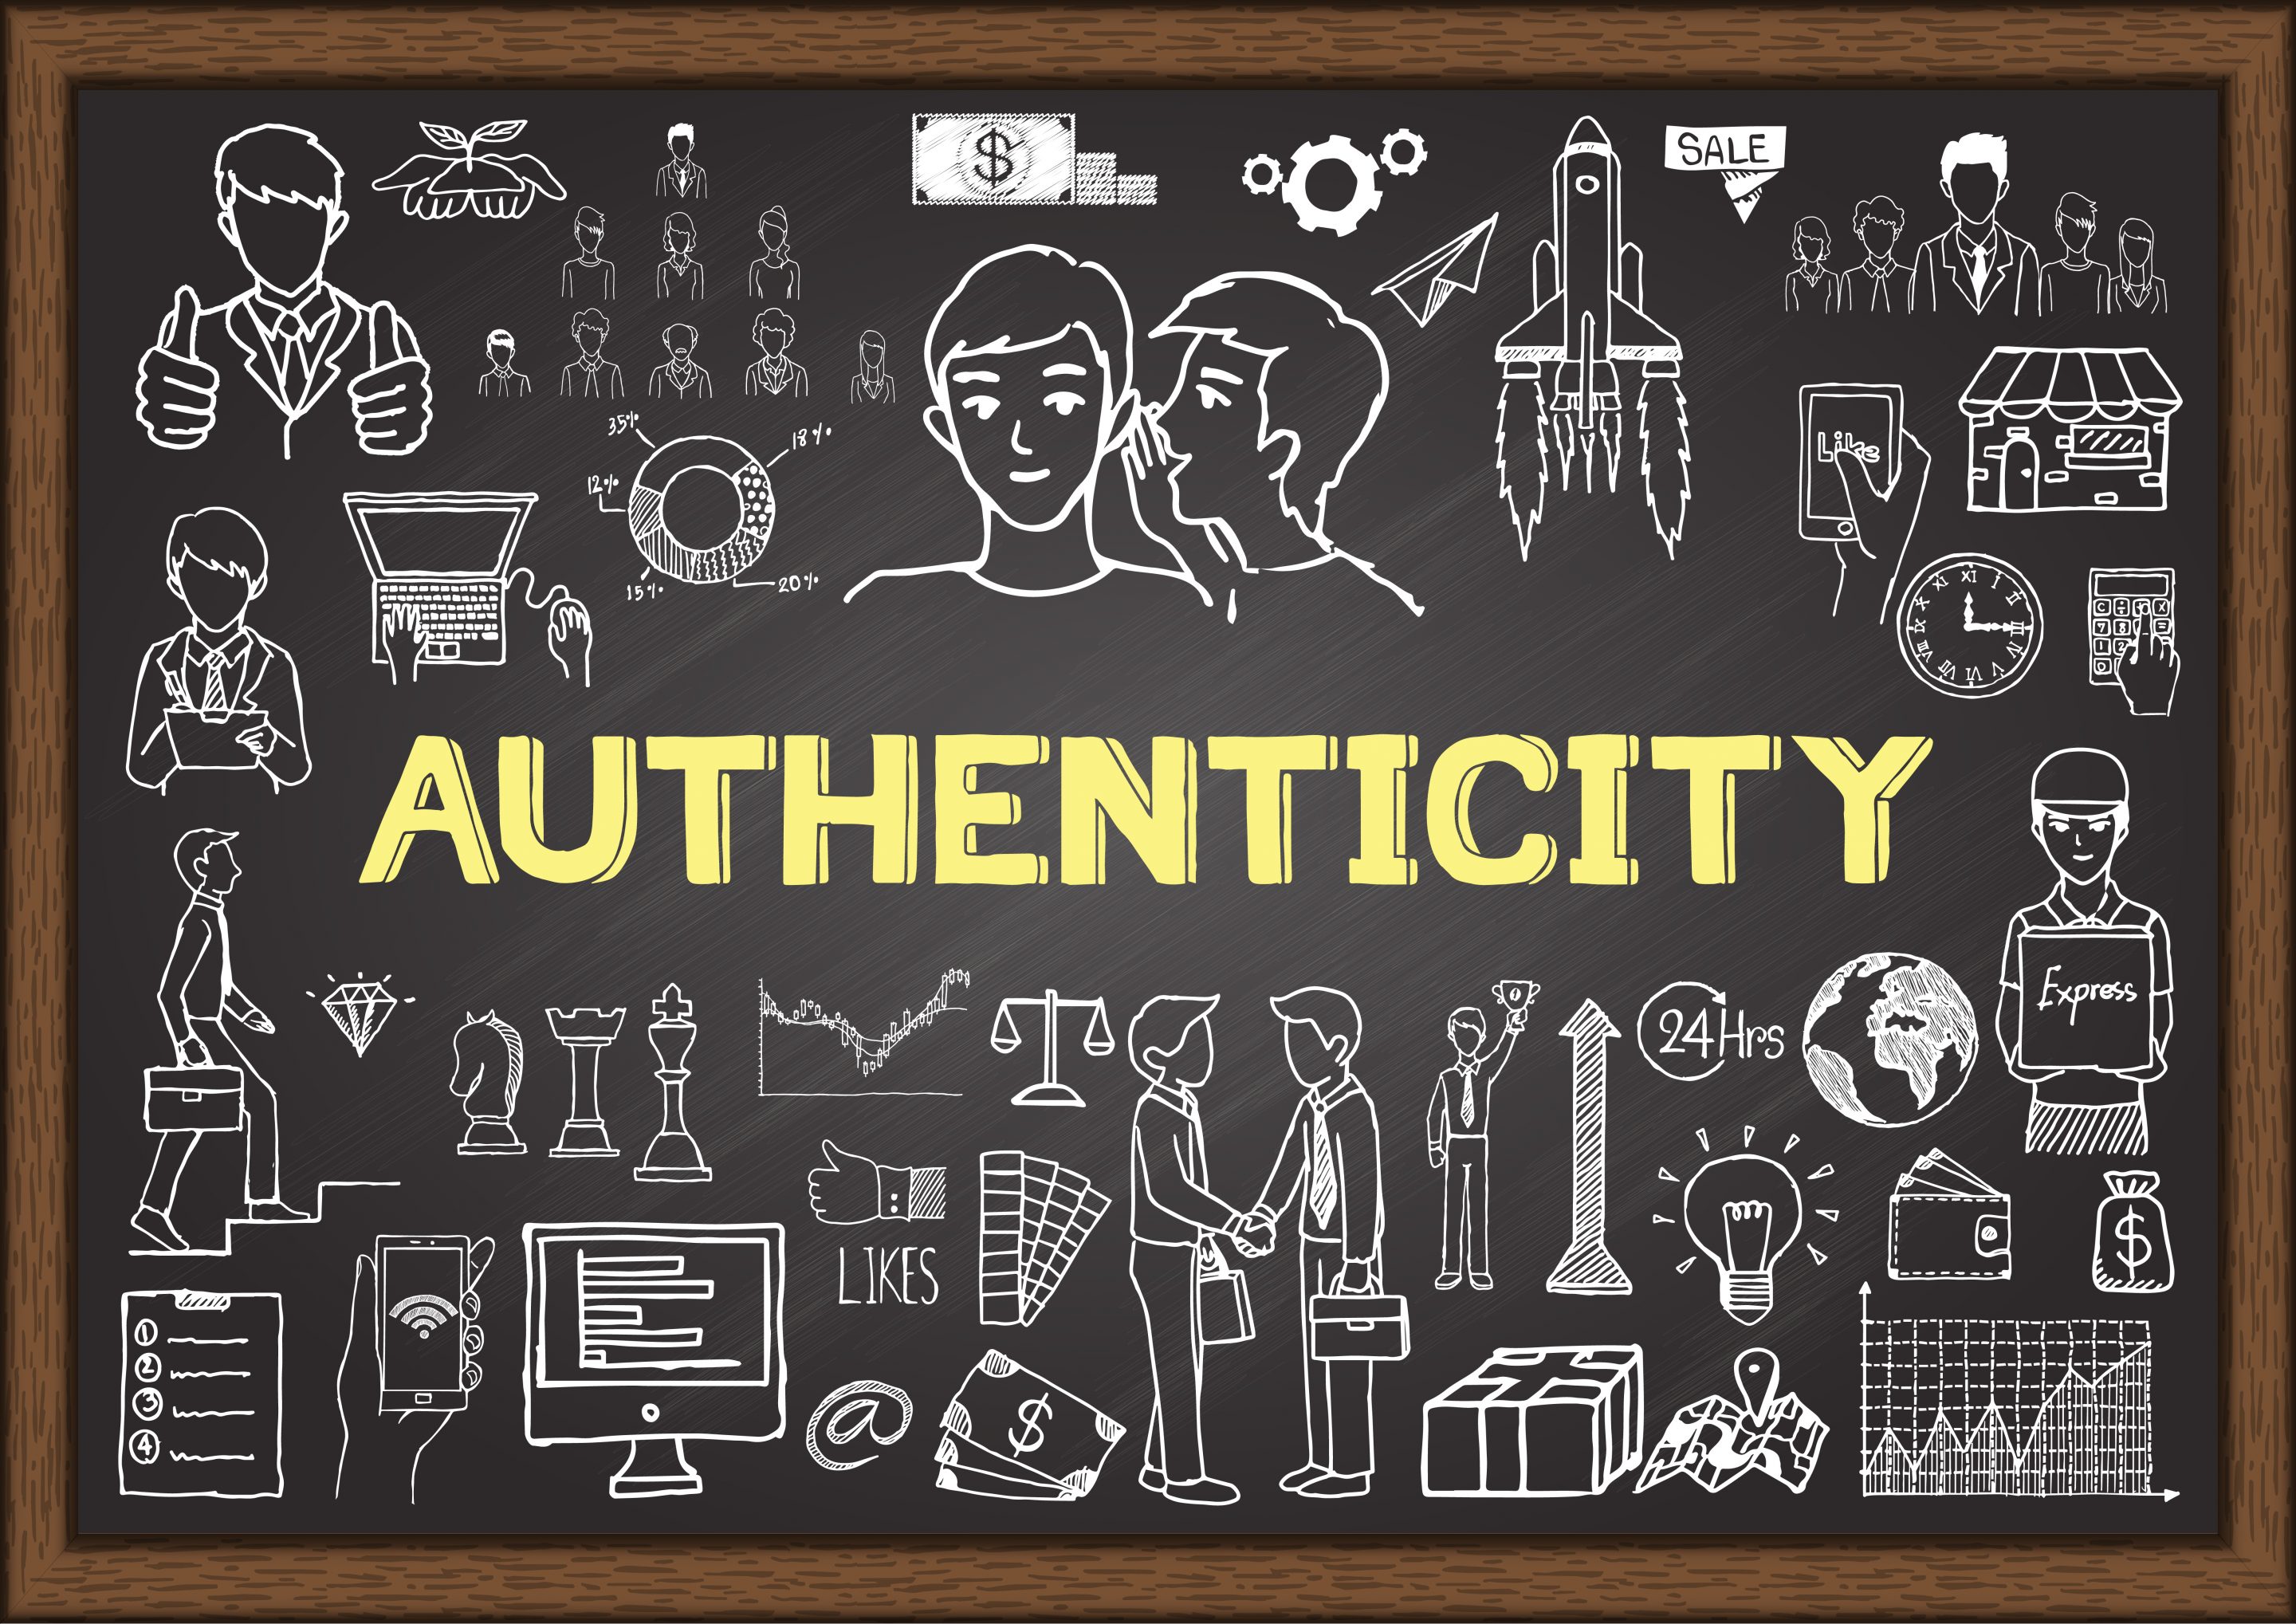 The word Authenticity on a blackboard with images of people connecting drawn in chalk around it.